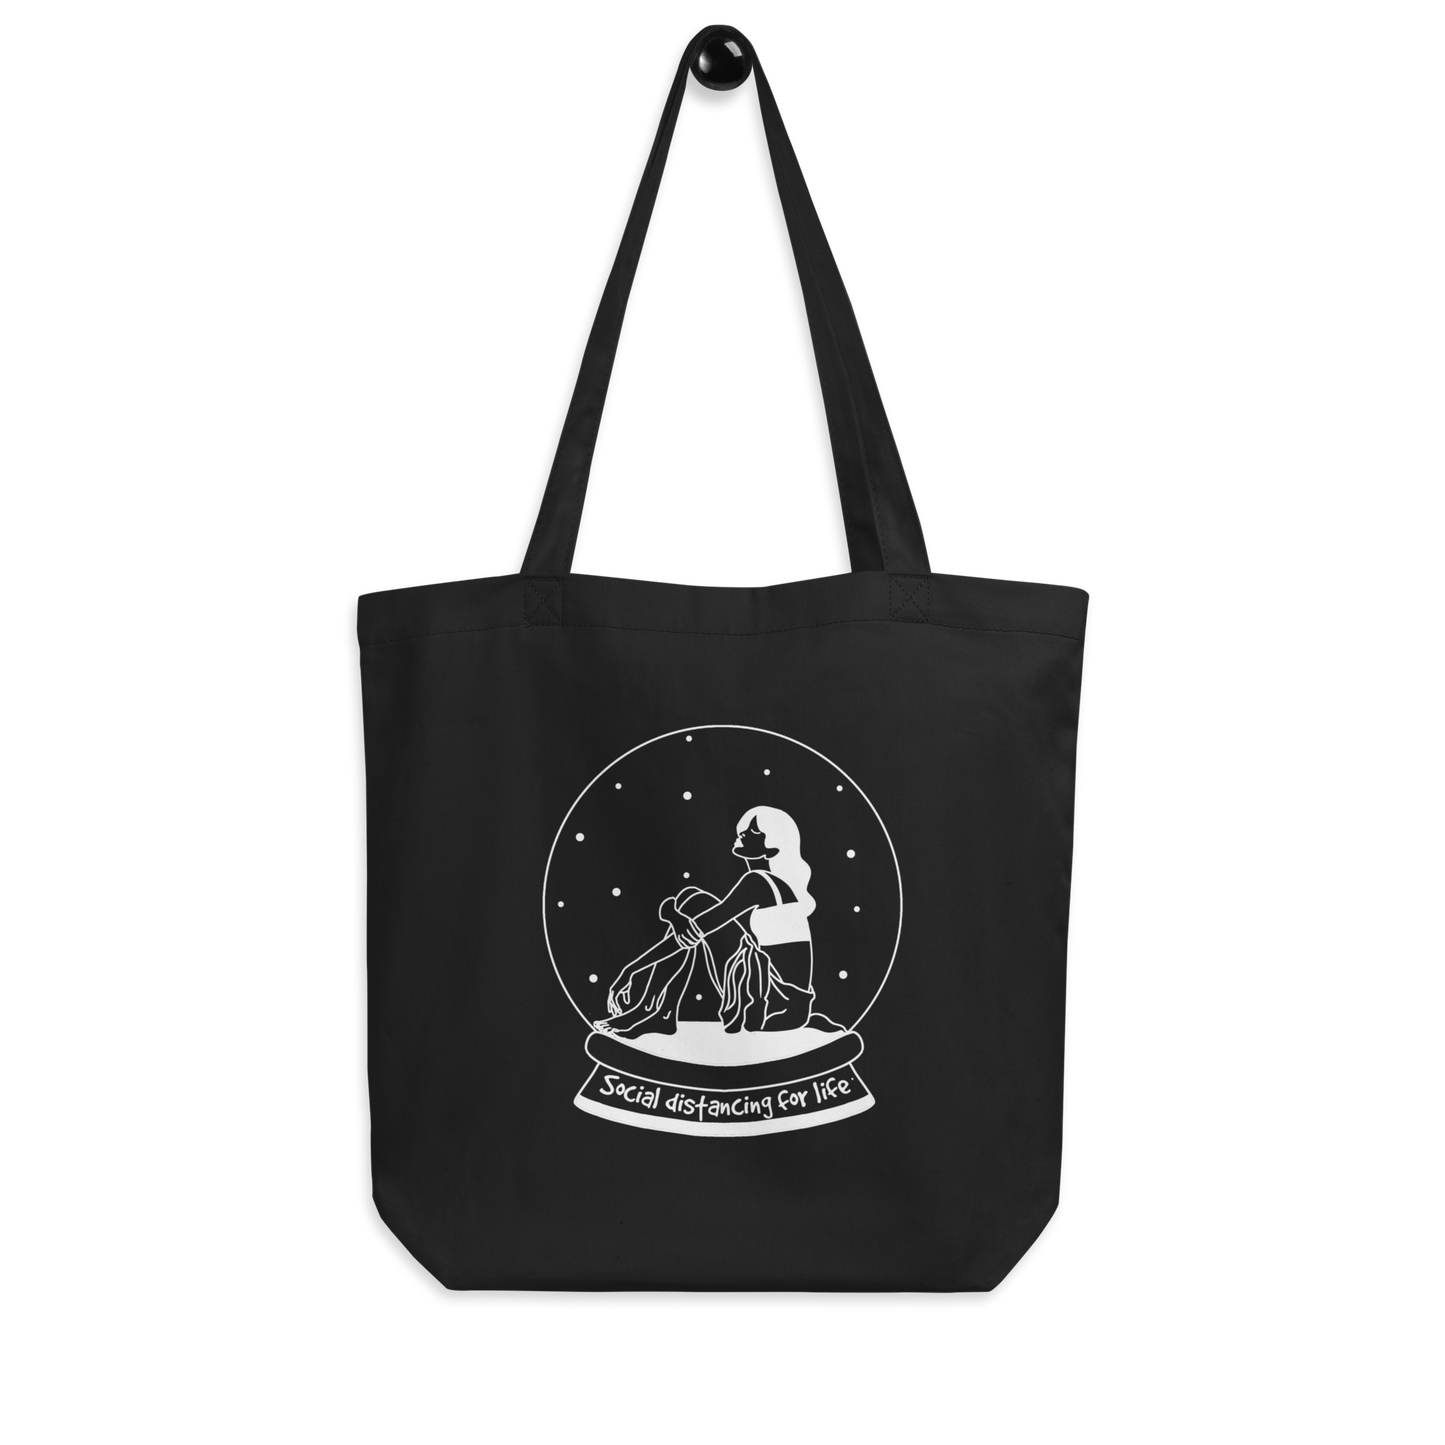 Social Distancing for Life Tote